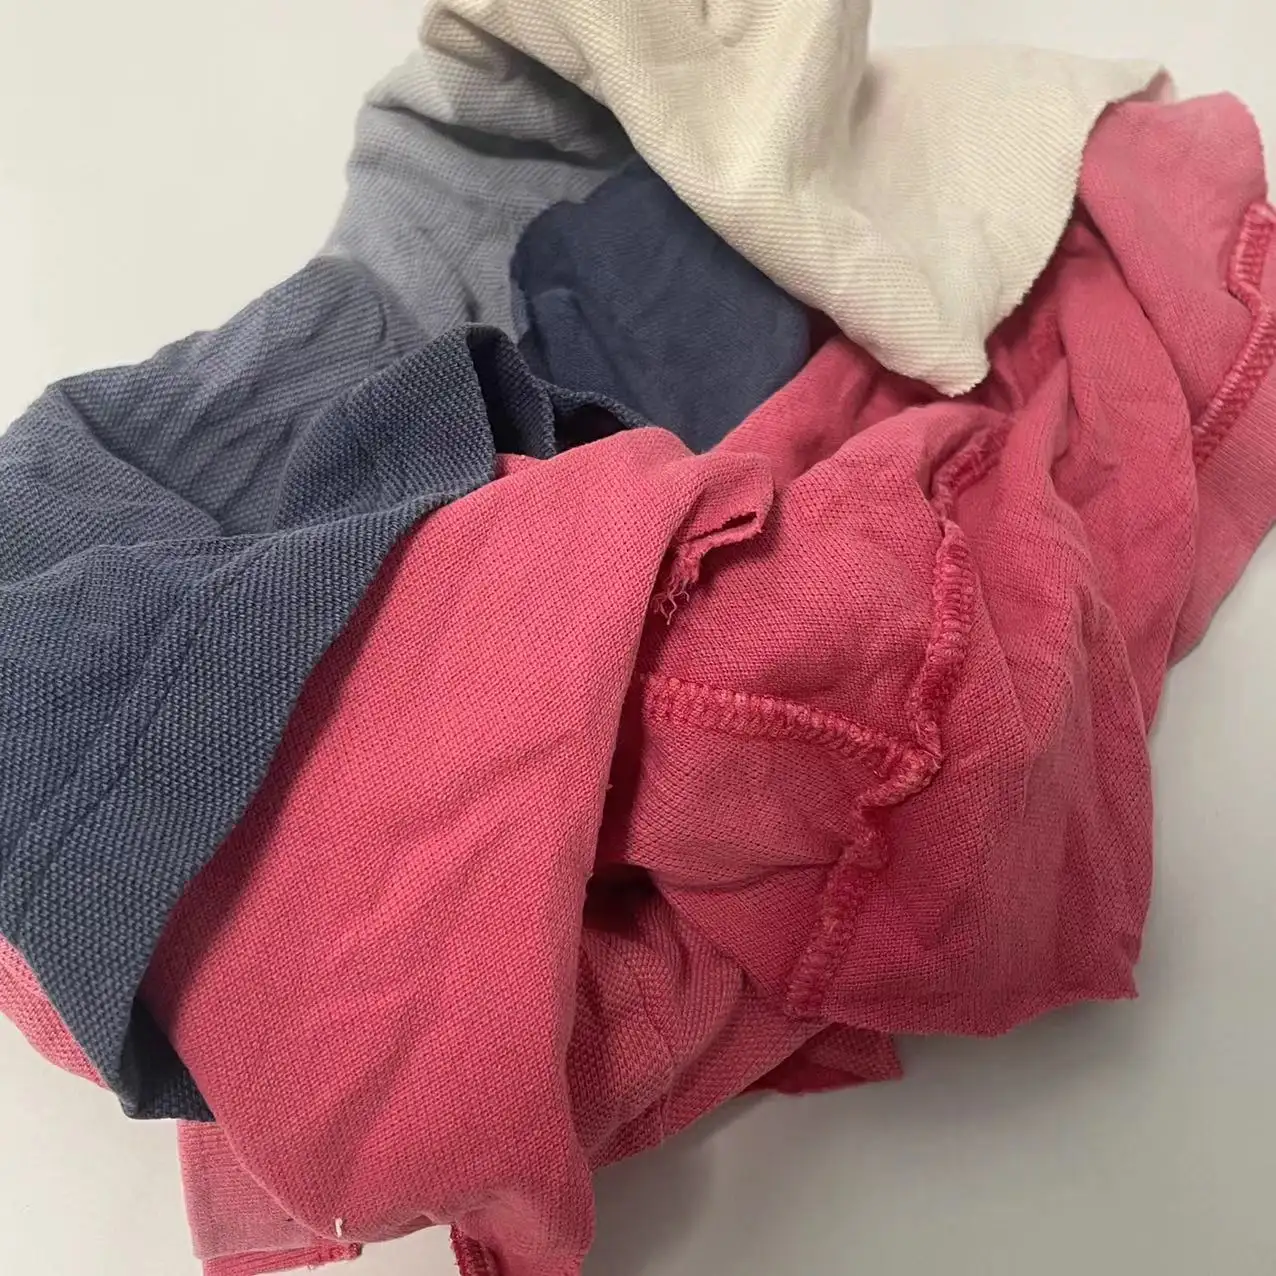 Hot Sale 100% Cotton Soft Material Wiping Cloth Dark Color Mixed T Shirt Rags Cotton Wiping Rags